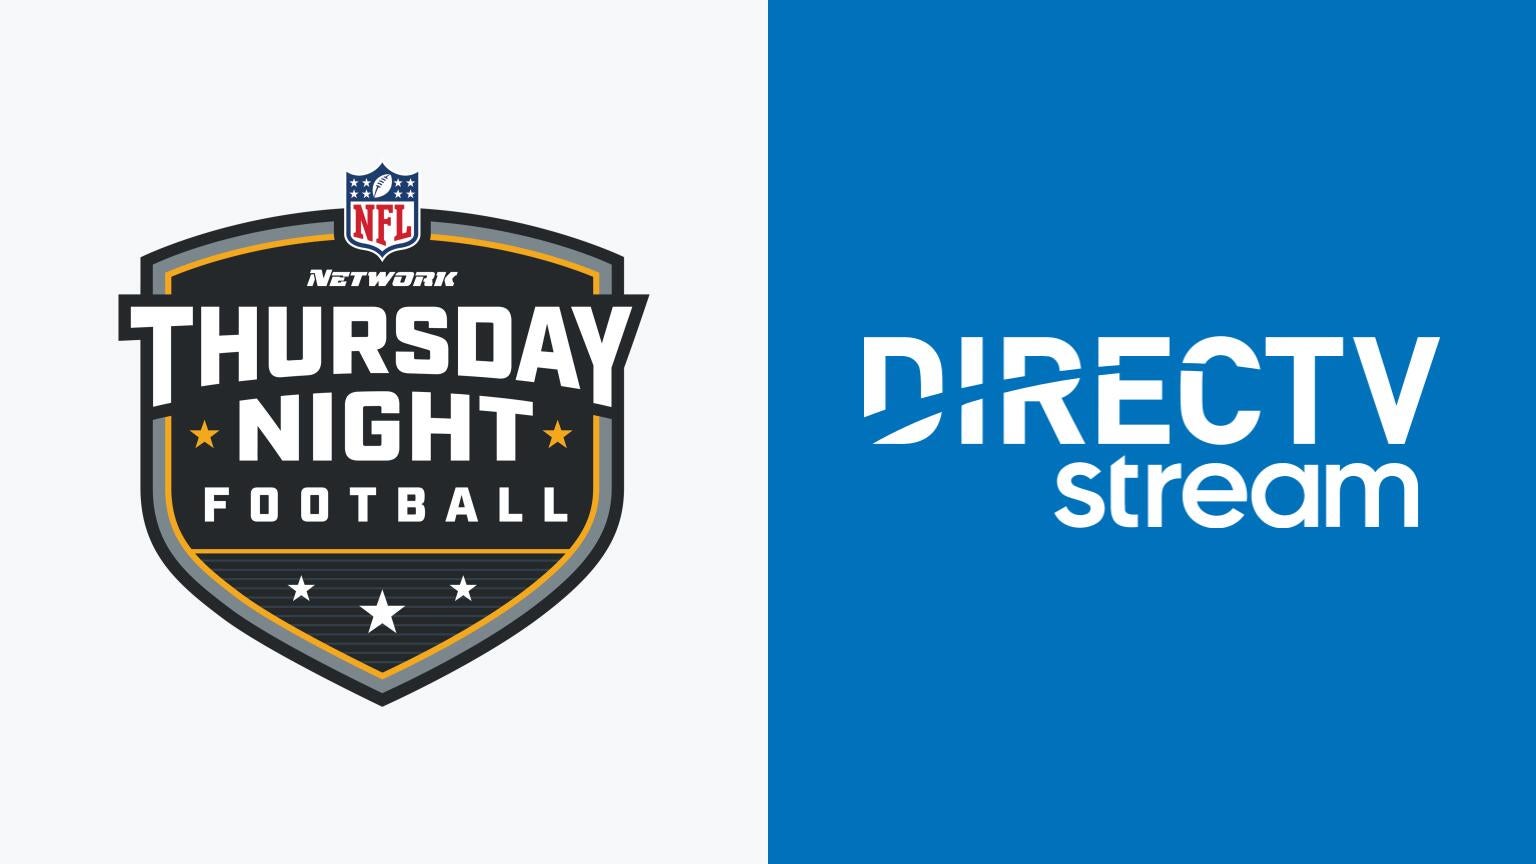 Can You Watch Thursday Night Football on NFL Network with DIRECTV STREAM?